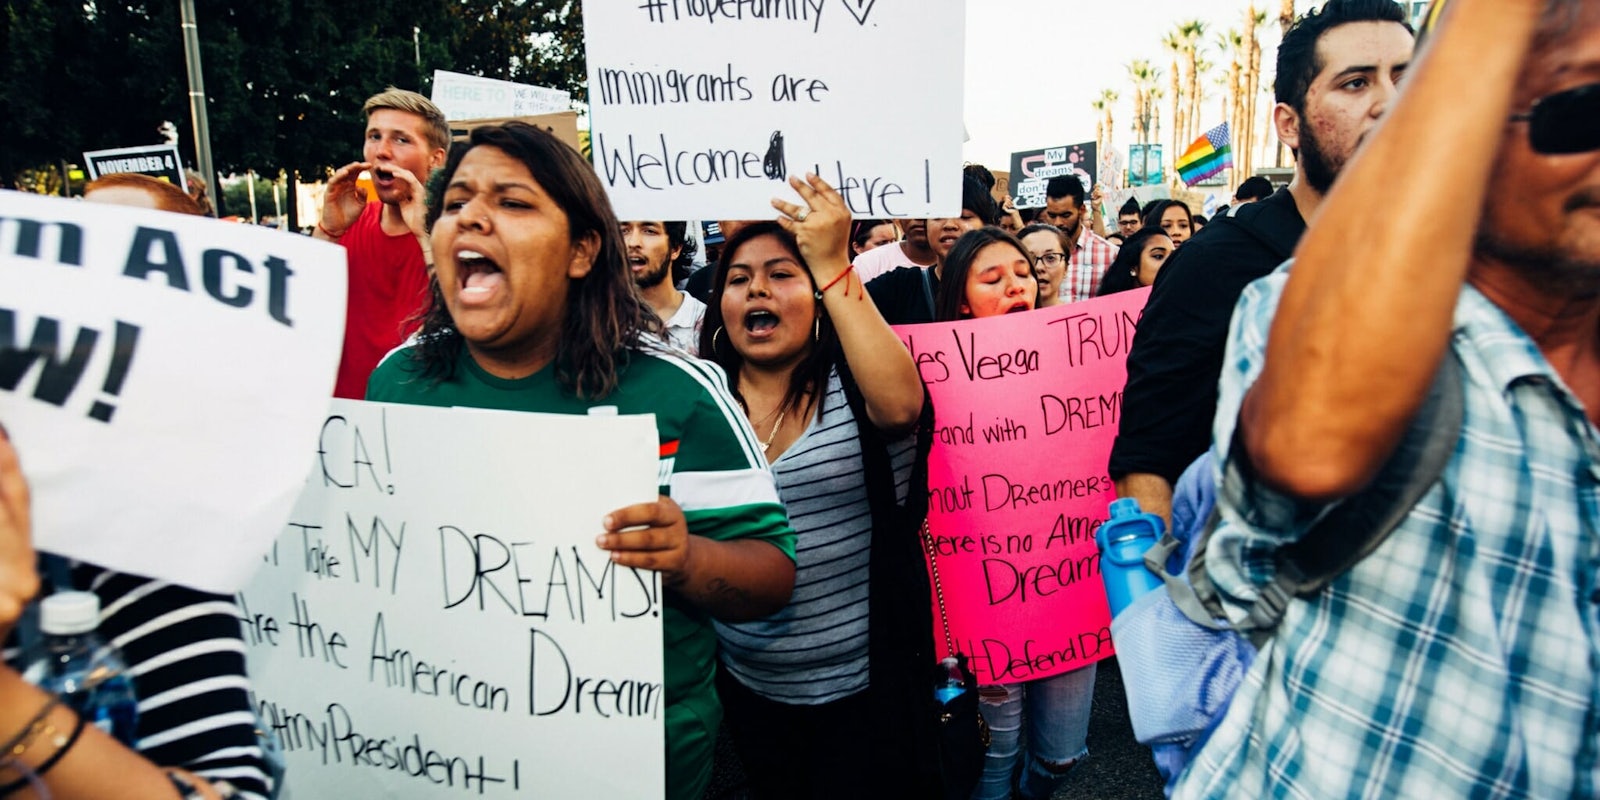 Protesters in Los Angeles defending the Deferred Action for Childhood Arrivals (DACA) Program on Sept. 5, the day the Trump administration ended DACA.